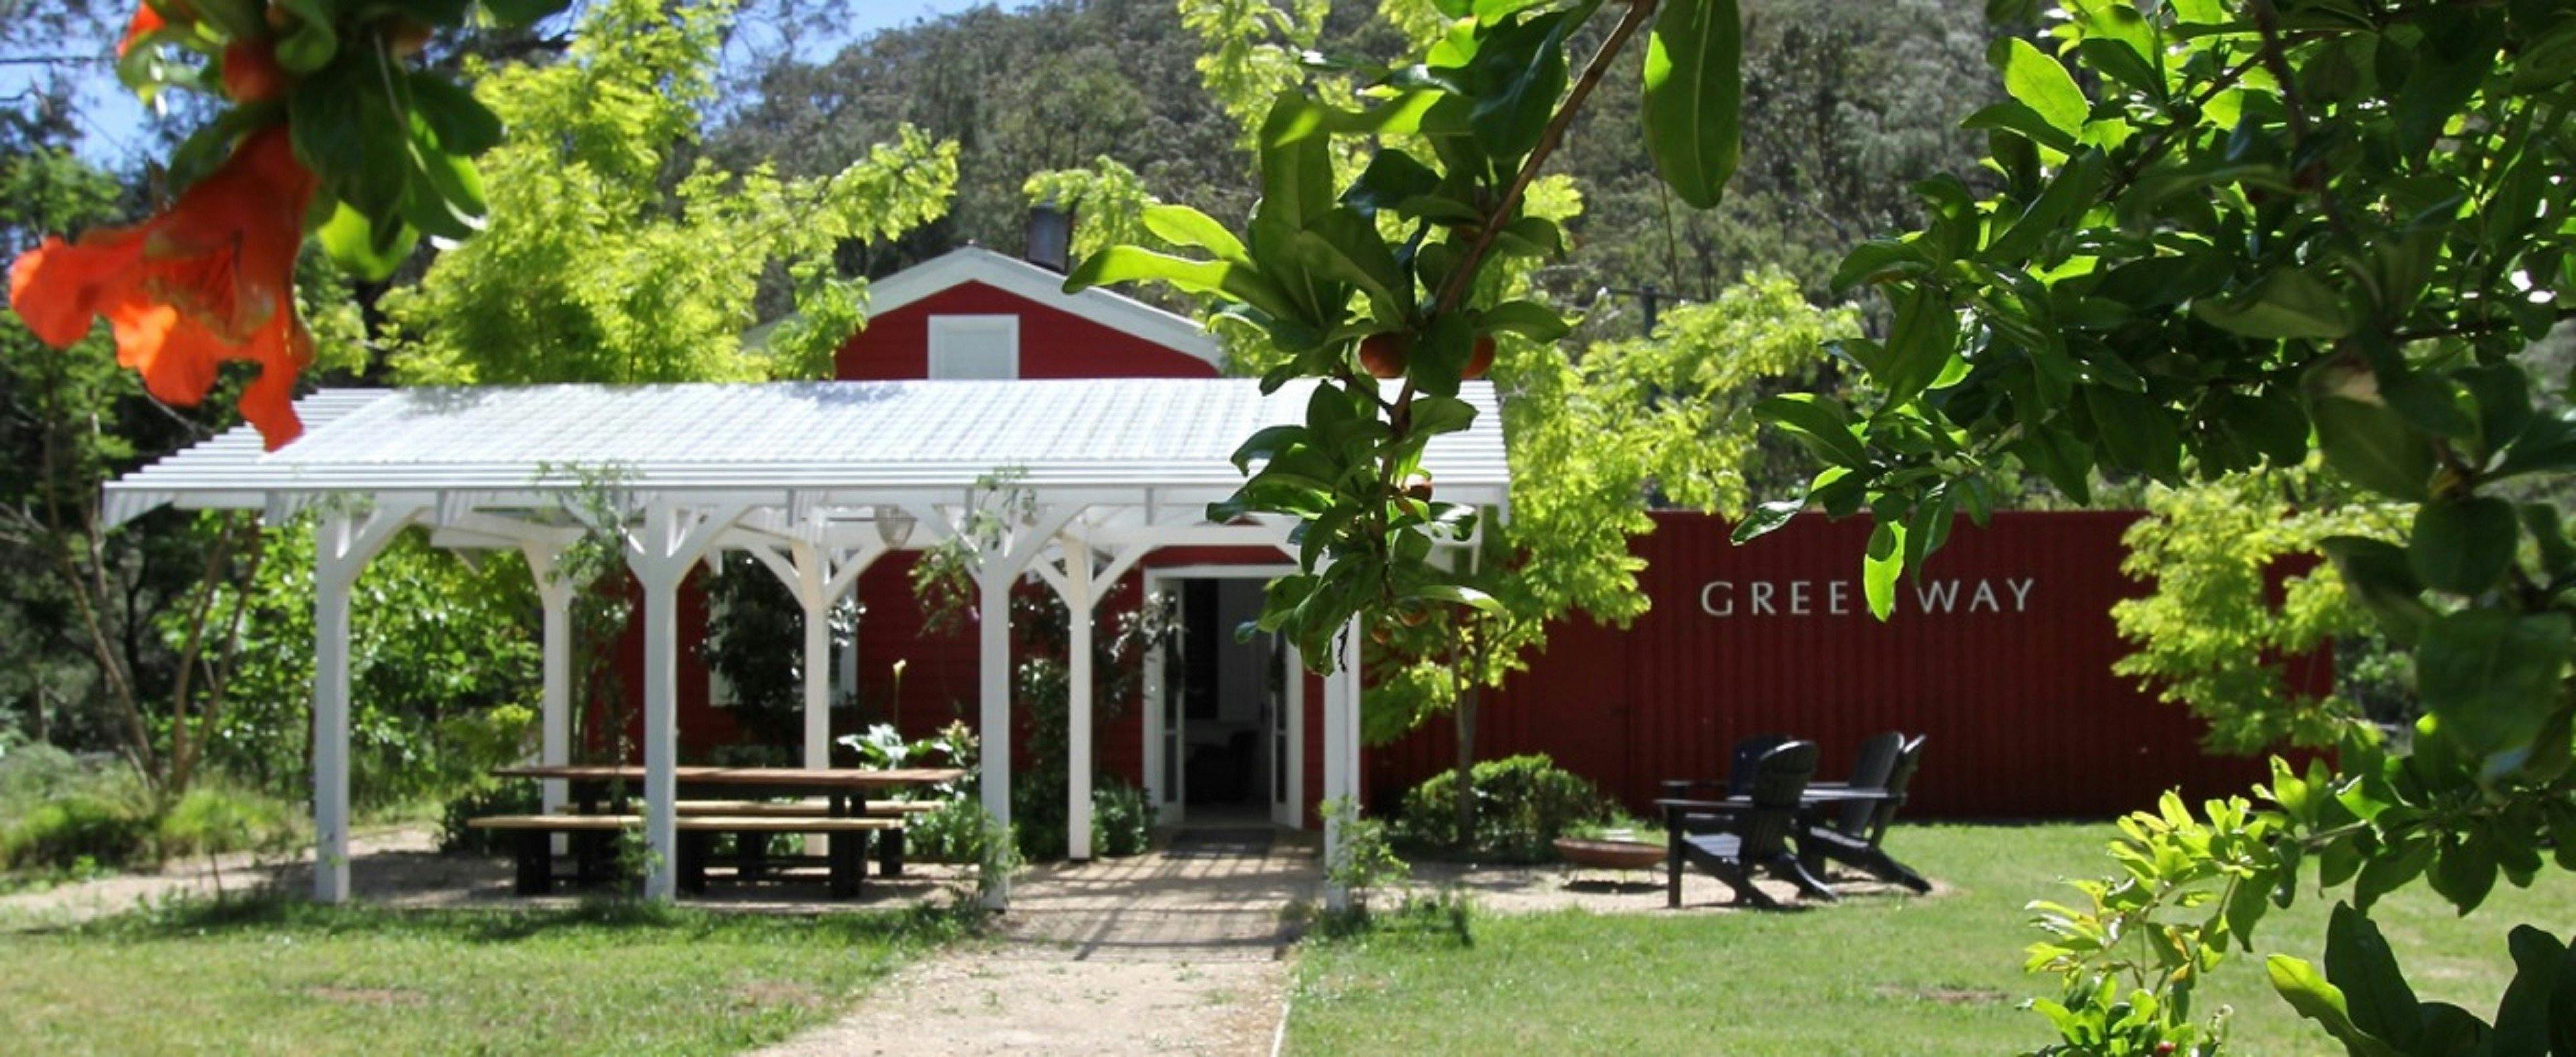 Greenway Wines | NSW Holidays & Accommodation, Things to Do